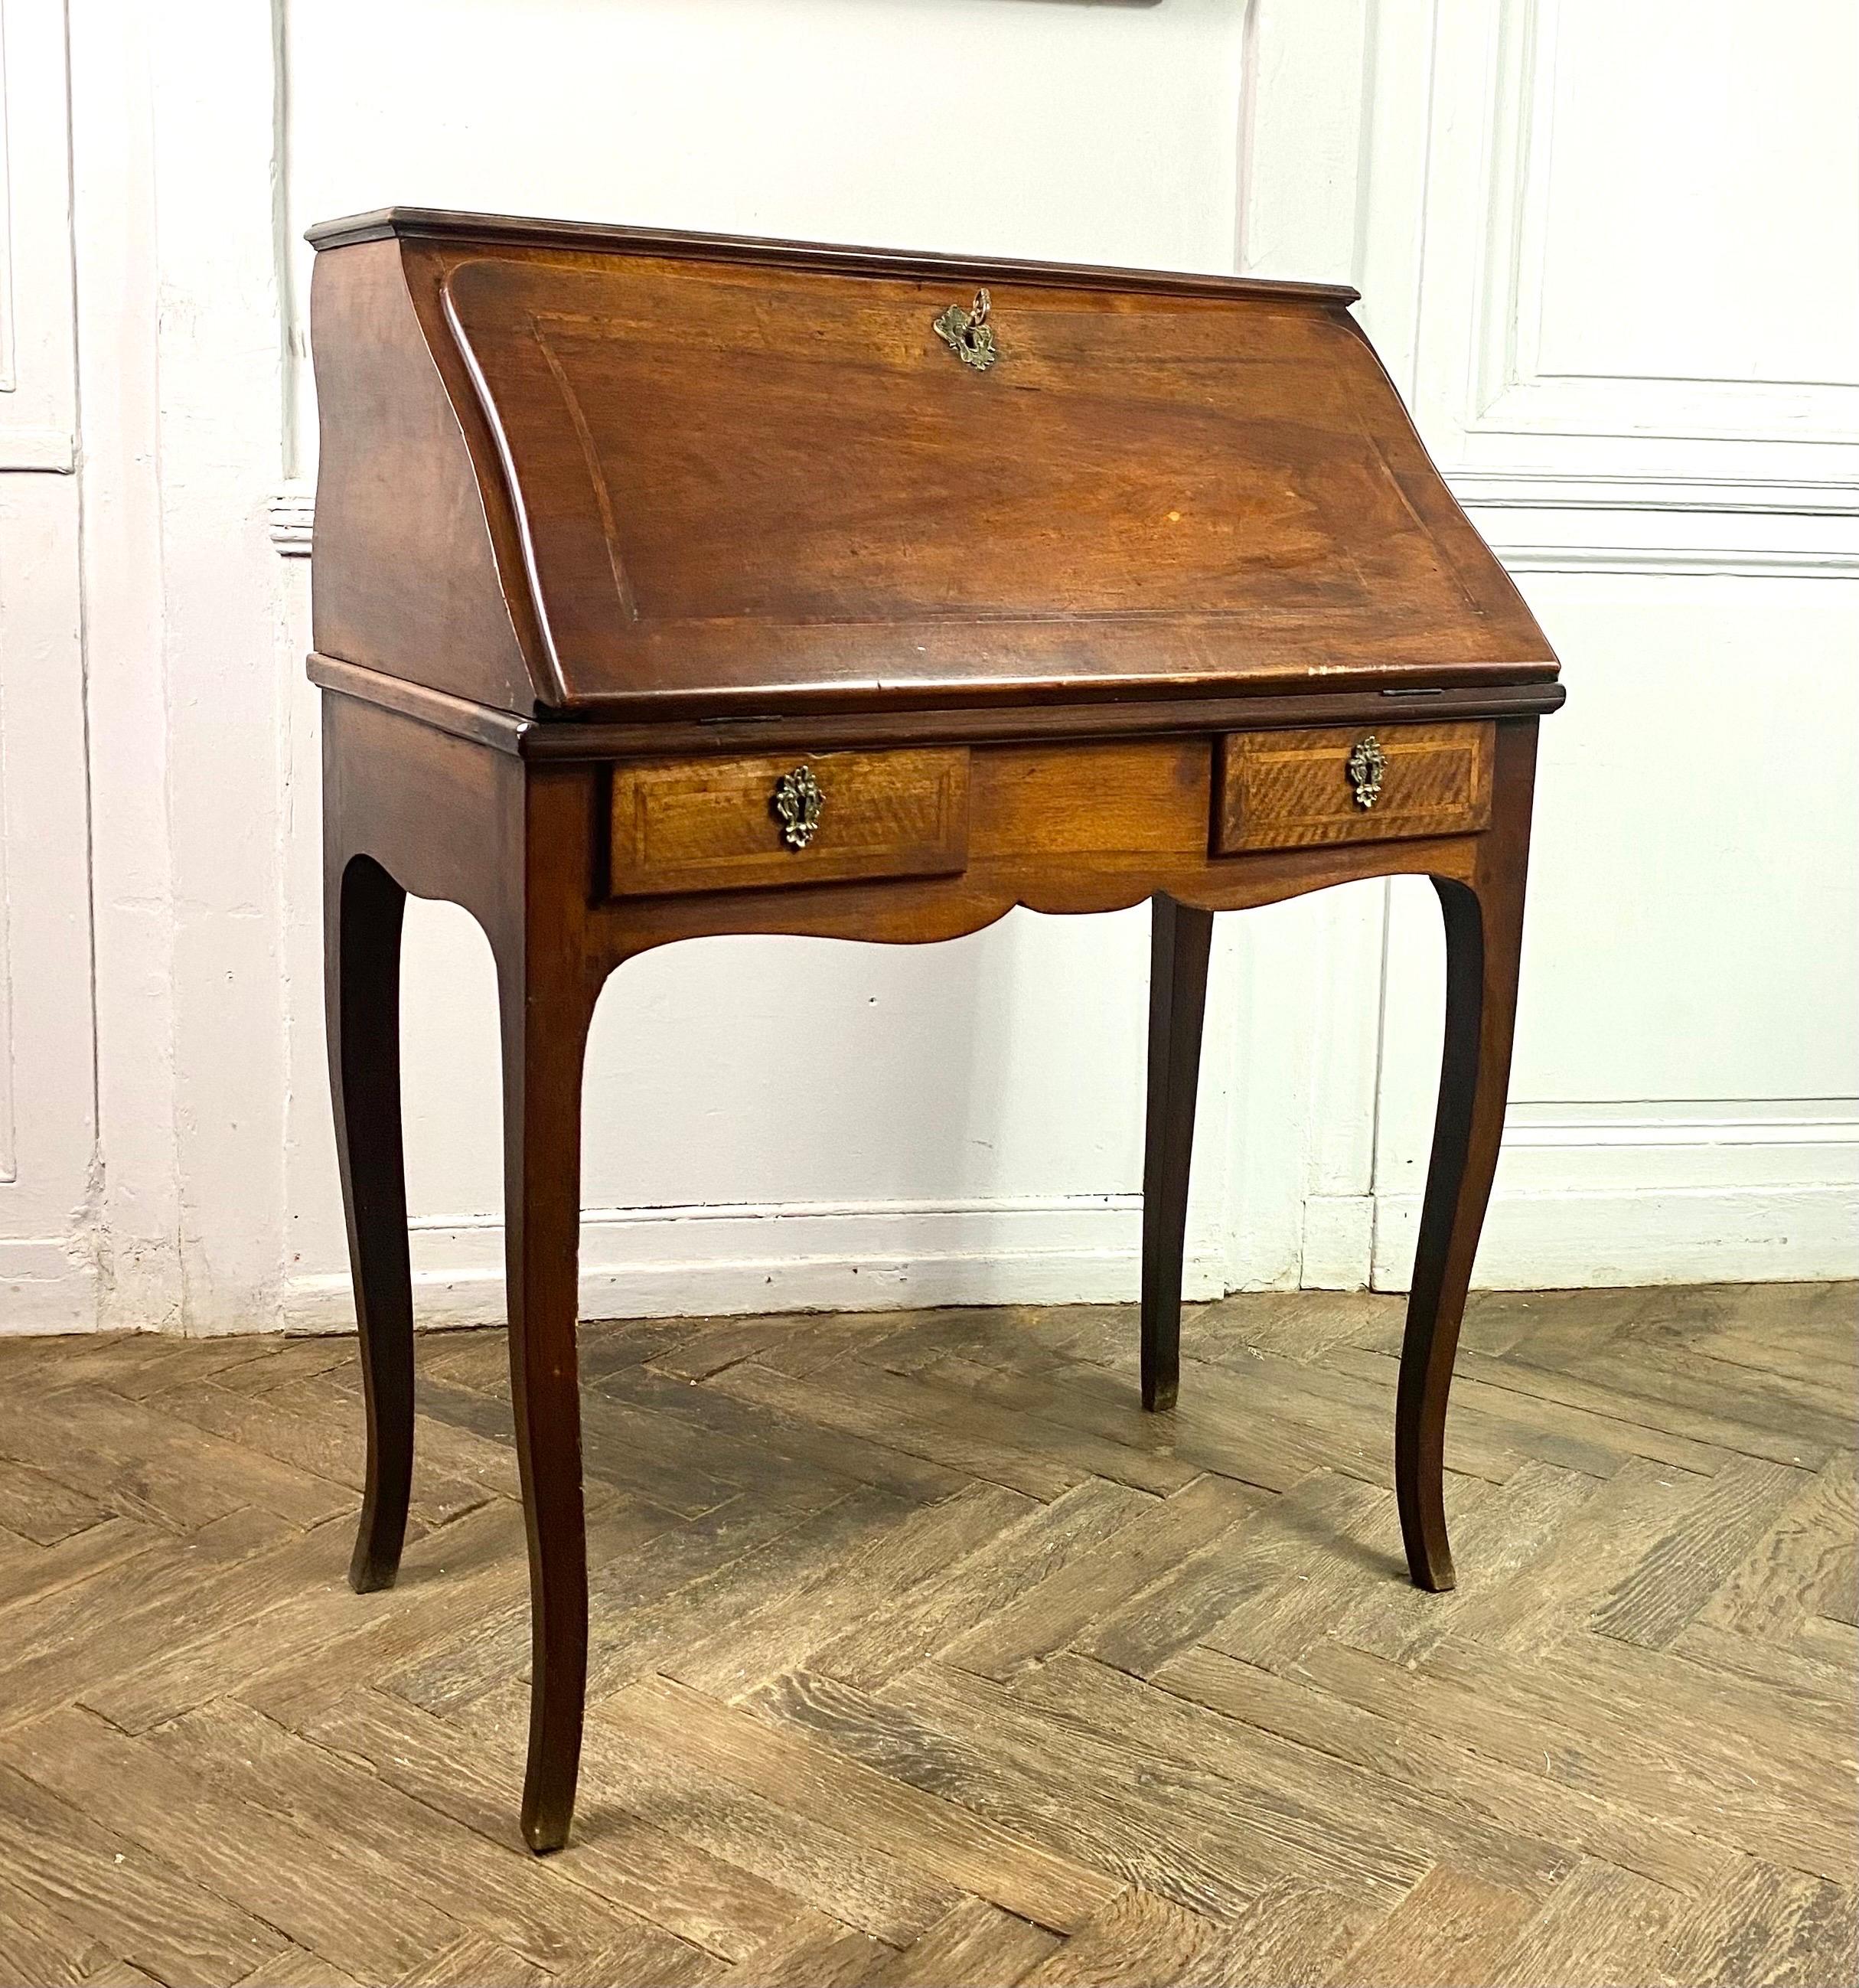 French Scriban desk, Donkey desk, Secretary -Louis XV Period - France 18th  In Good Condition For Sale In Beuzevillette, FR